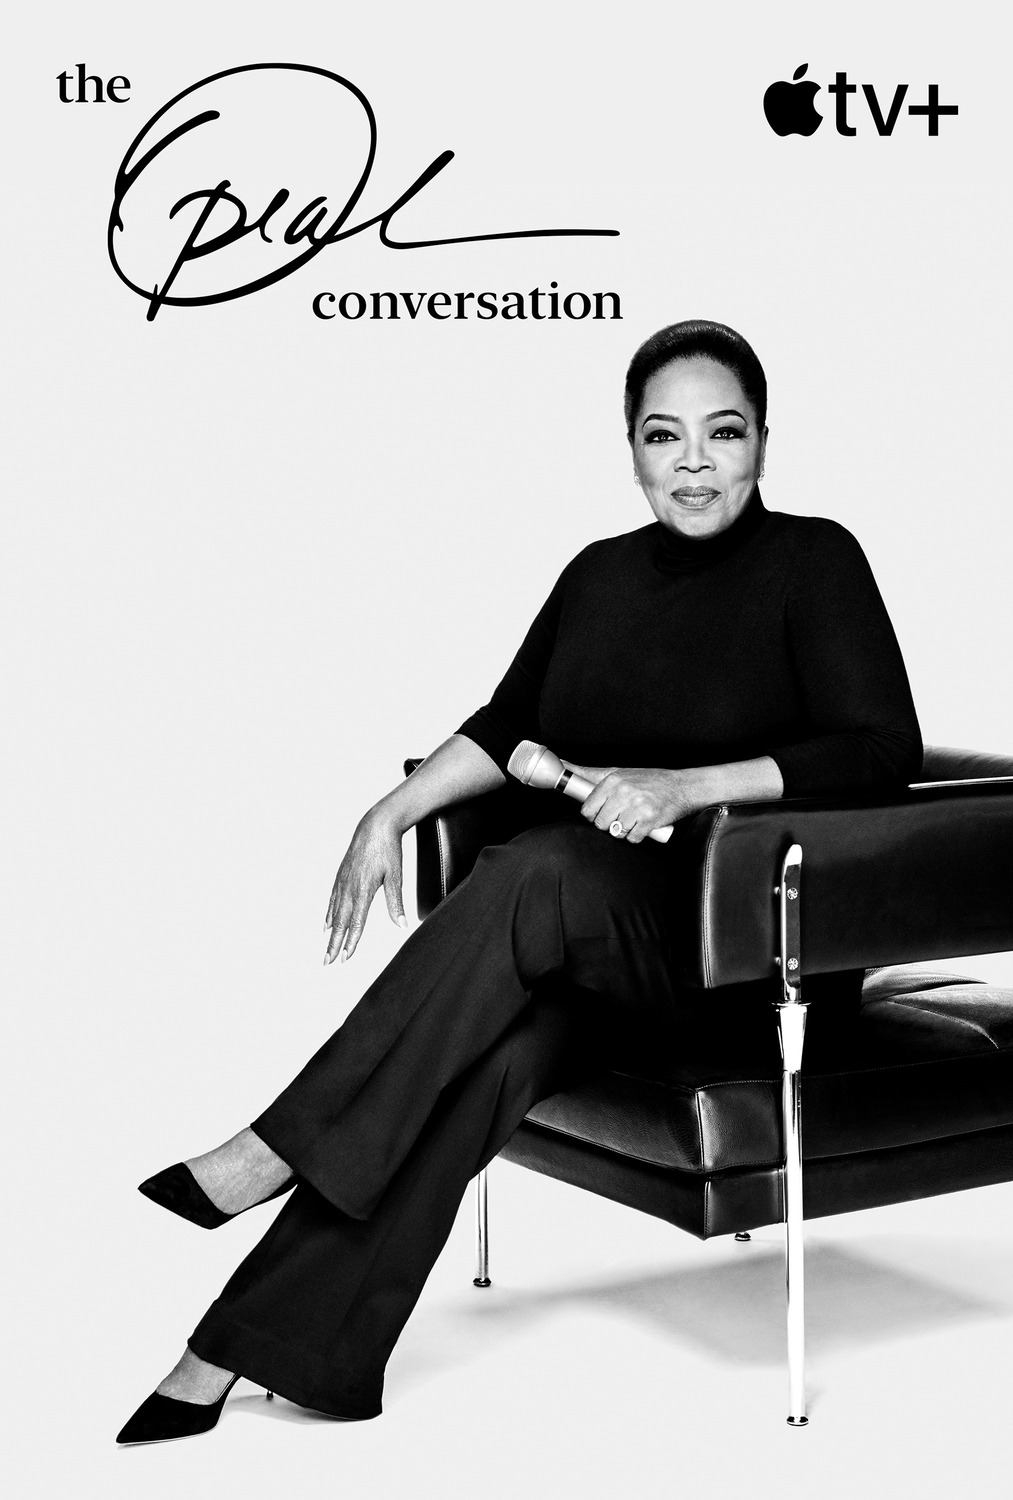 Extra Large TV Poster Image for The Oprah Conversation 